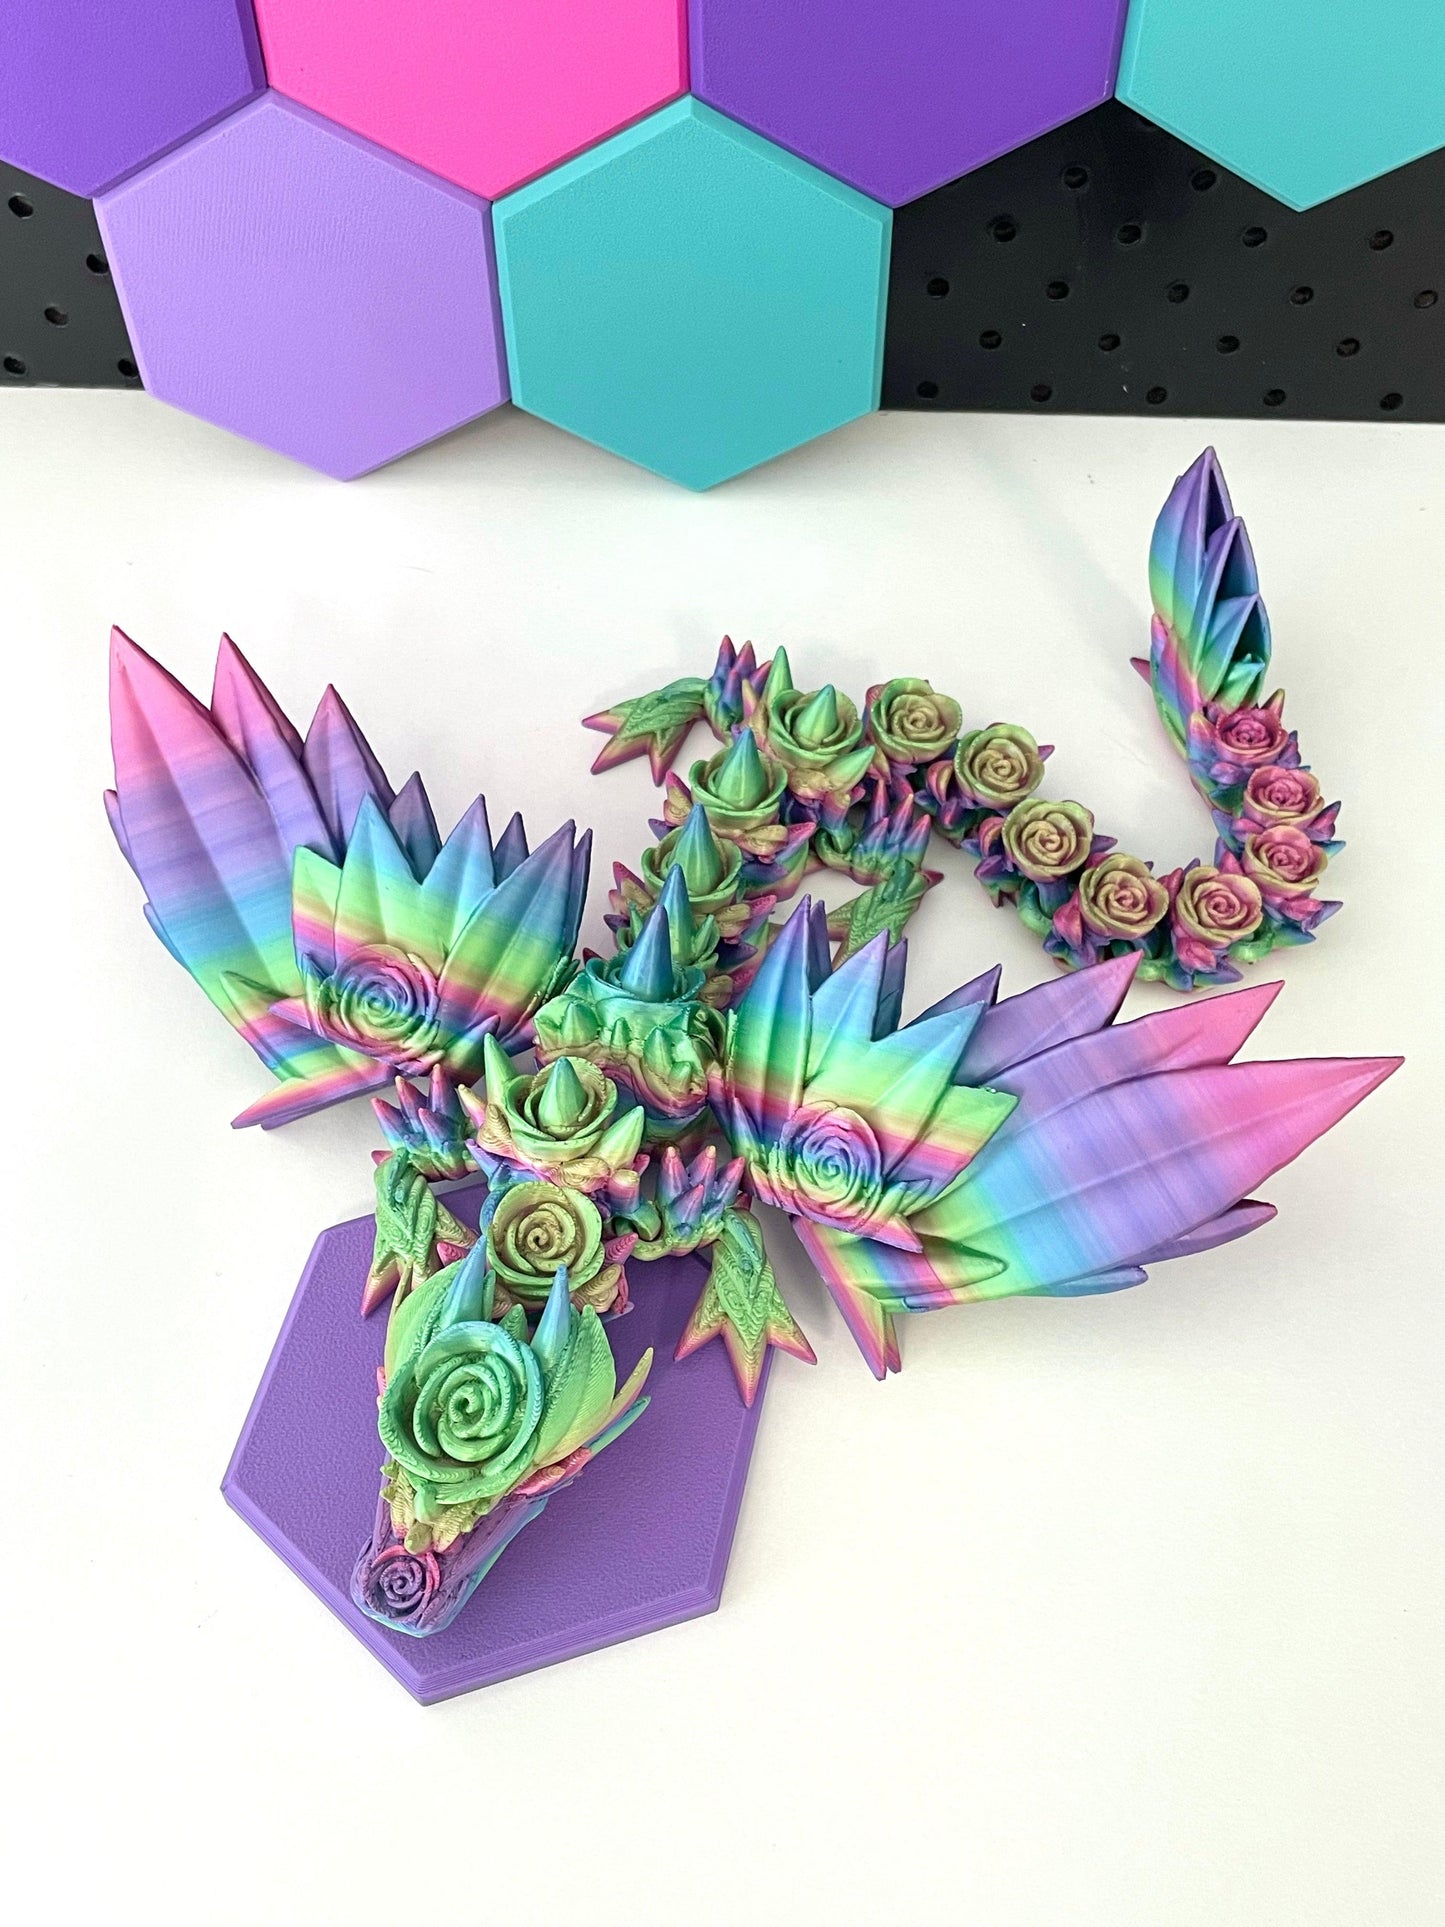 Rose Wing Dragon - Fantasy Forest 3D